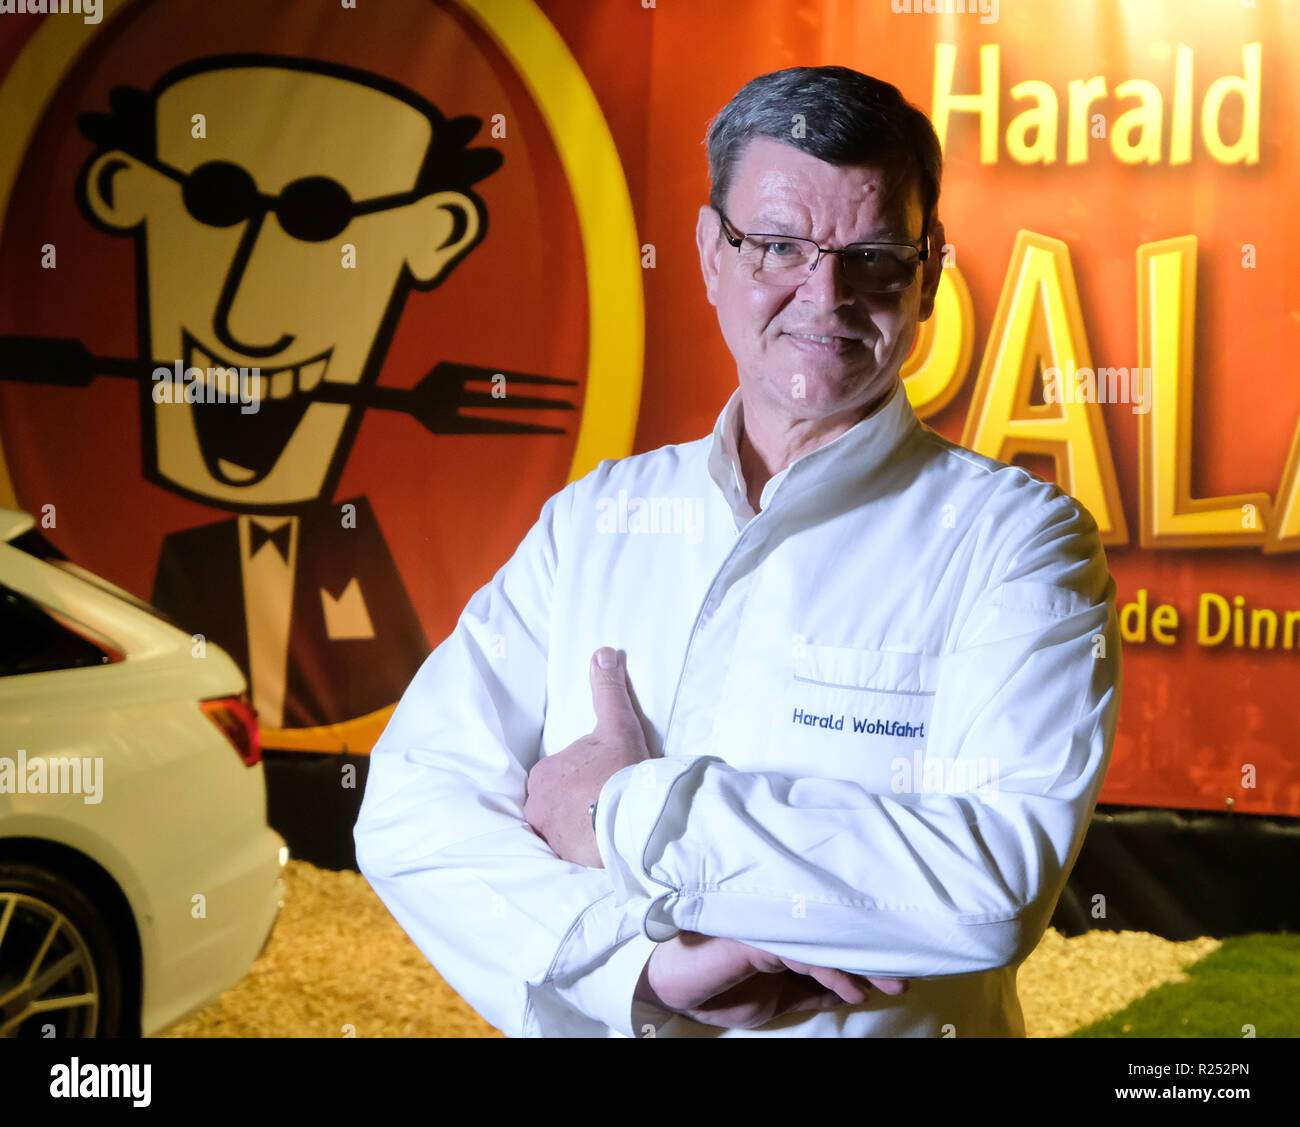 Stuttgart, Germany. 15th Nov, 2018. Top chef Harald Wohlfahrt is standing in front of the venue at the opening of the new season of the Palazzo Gastro Show. Credit: Bernd Weißbrod/dpa/Alamy Live News Stock Photo